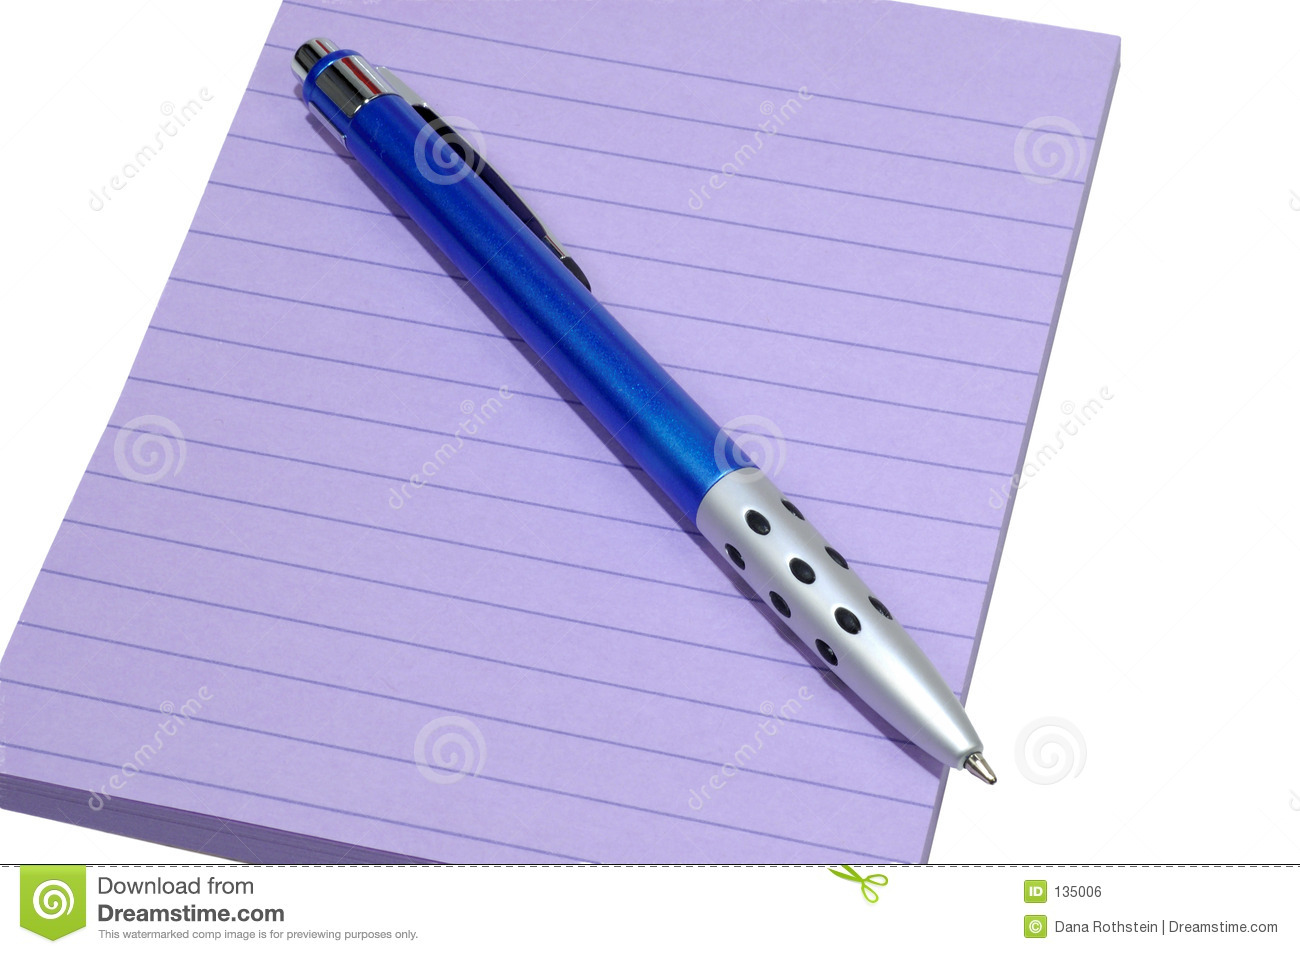 Pad And Pen Royalty Free Stock Image   Image  135006